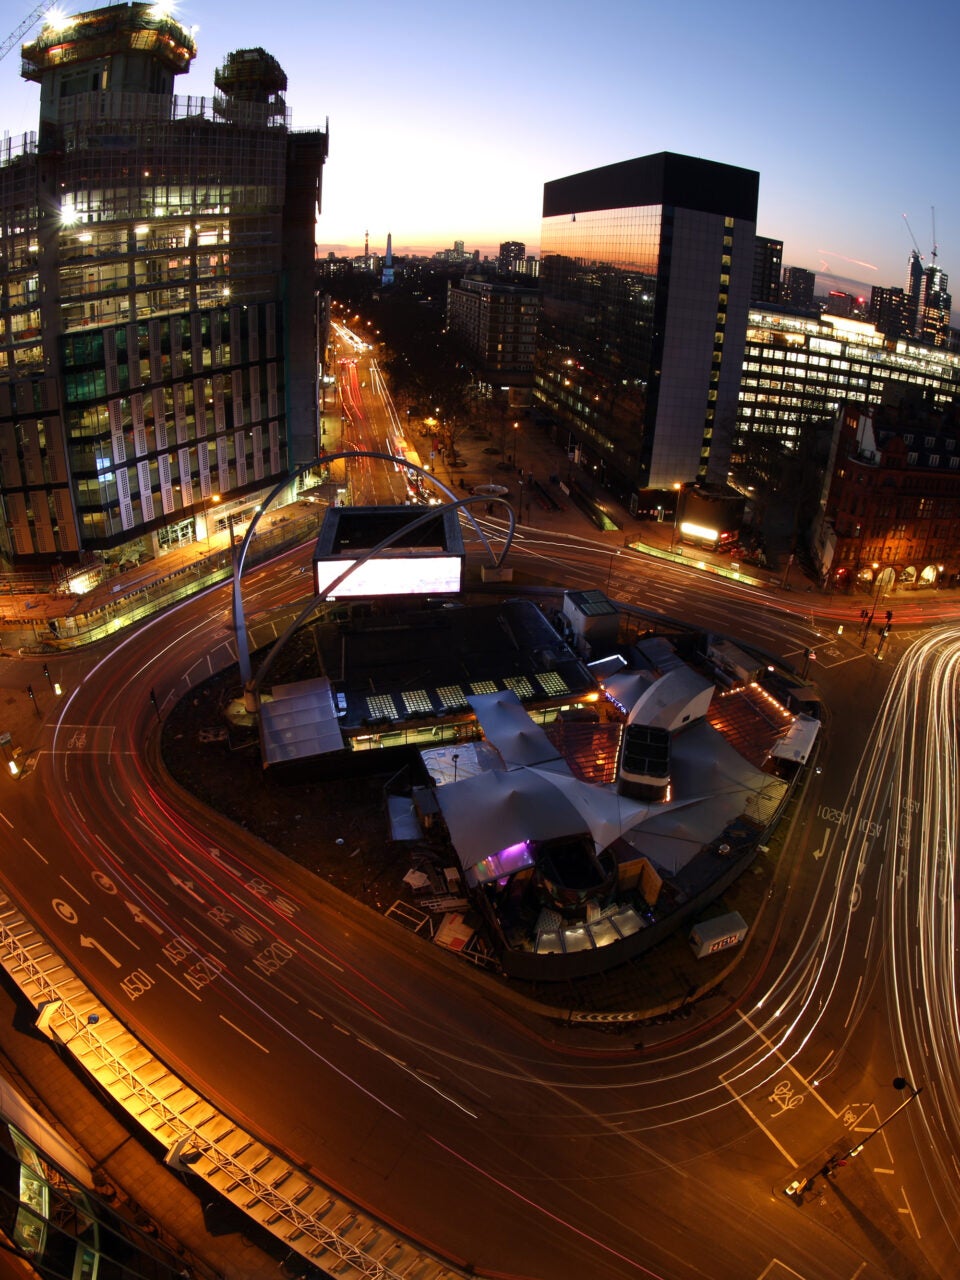 The last days of Silicon Roundabout